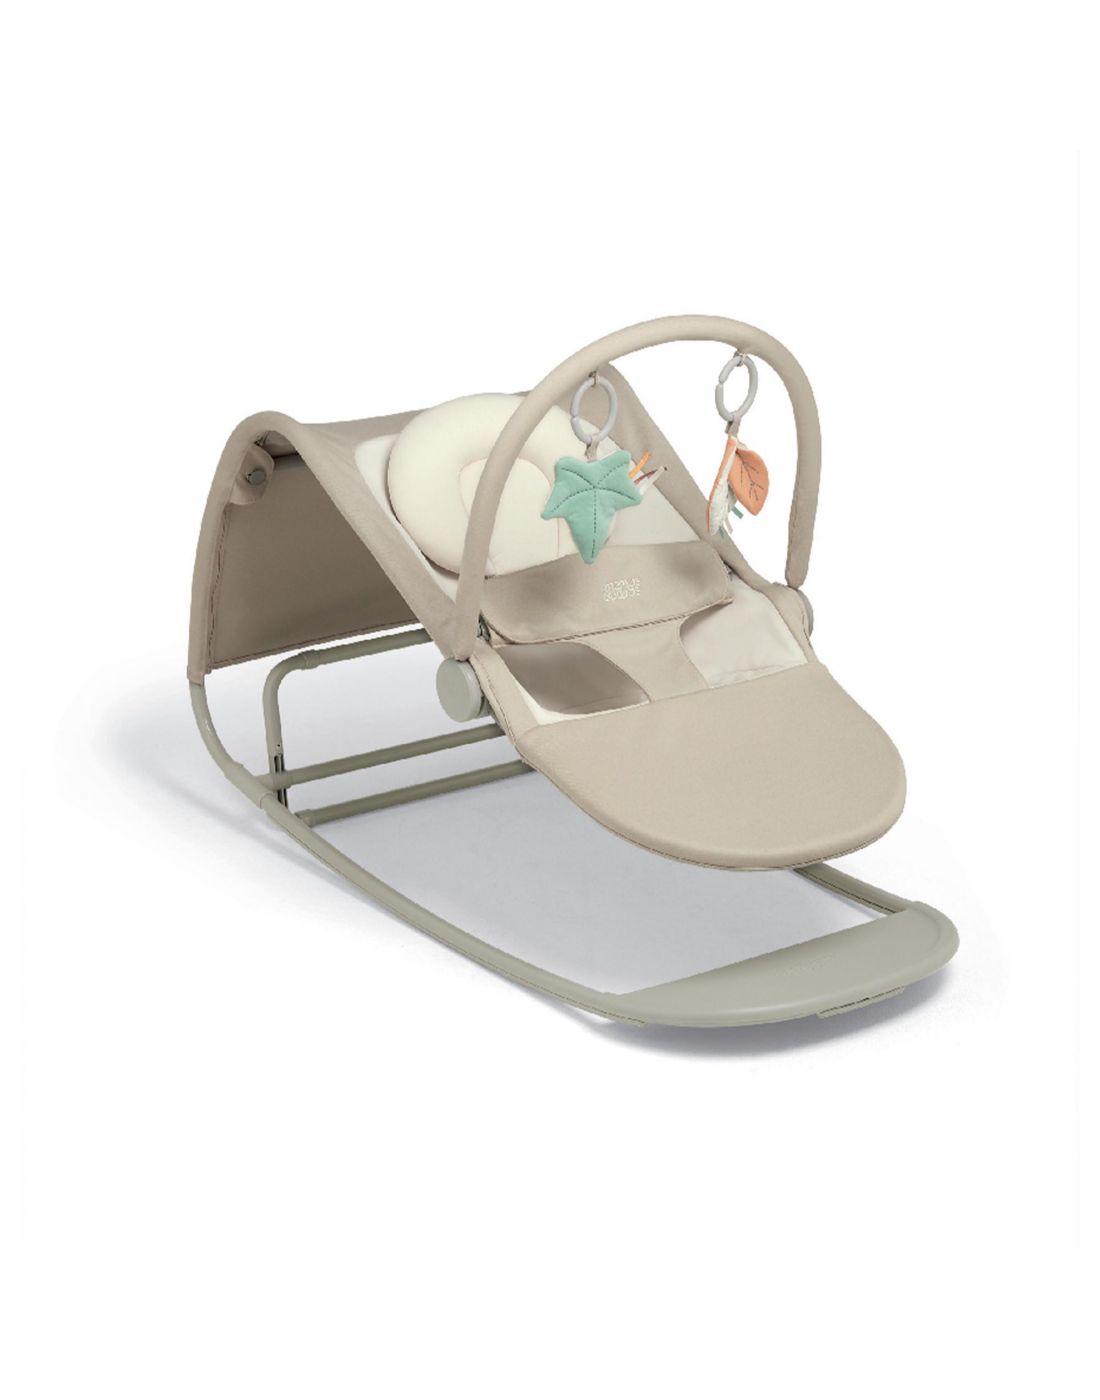 Mamas and Papas Relax Tempo Sand 3 in 1